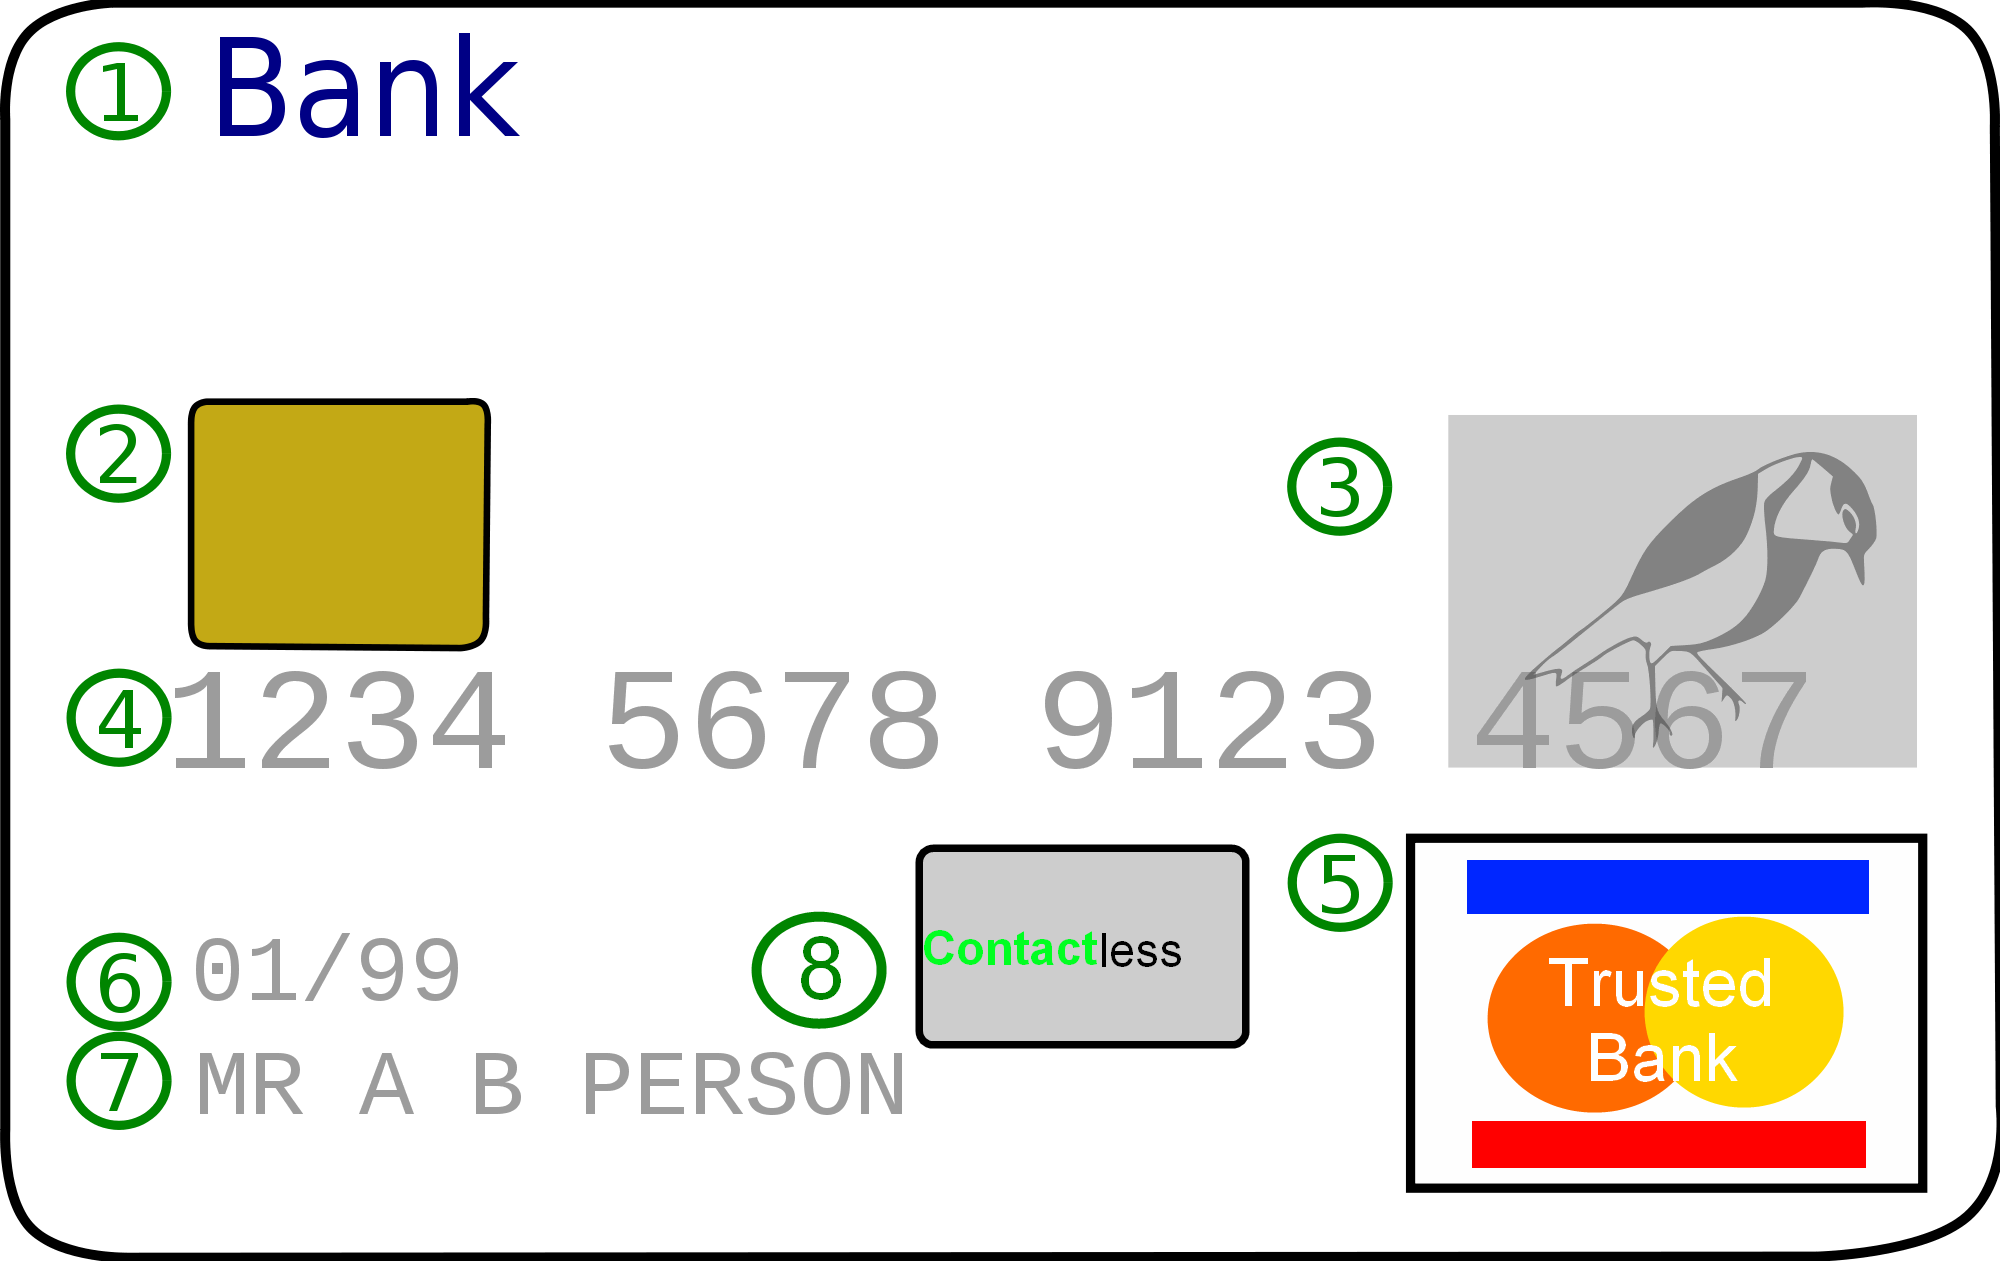 payment card issued to users as a system of payment